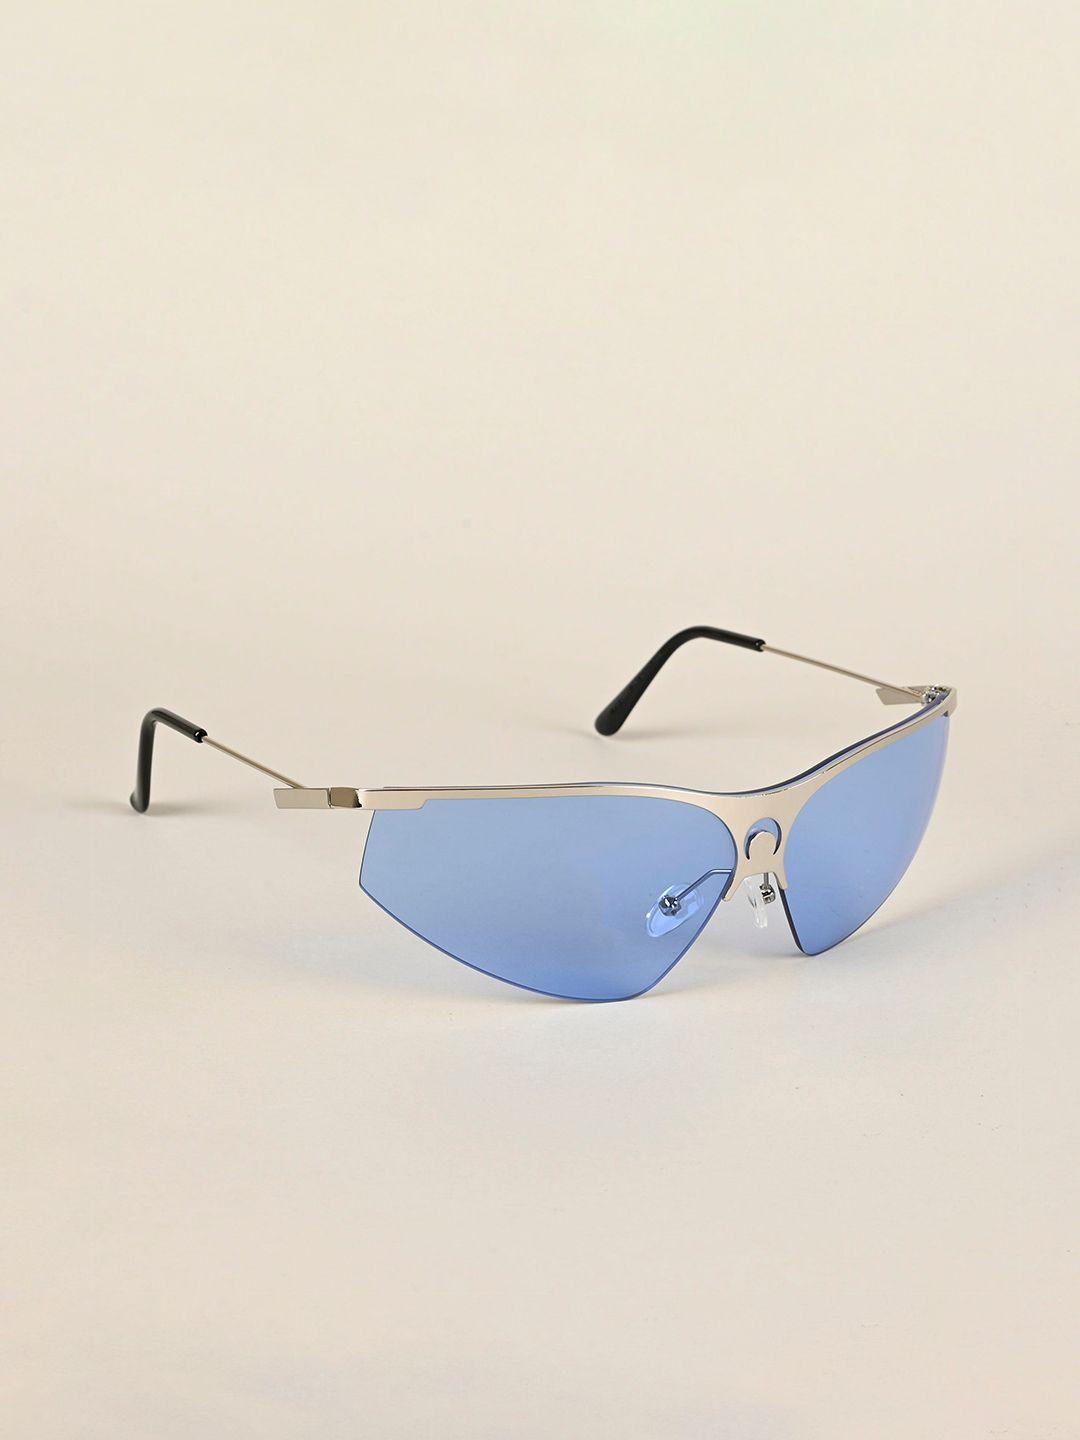 voyage silver-toned cateye sunglasses with uv protected lens 3563mg4222